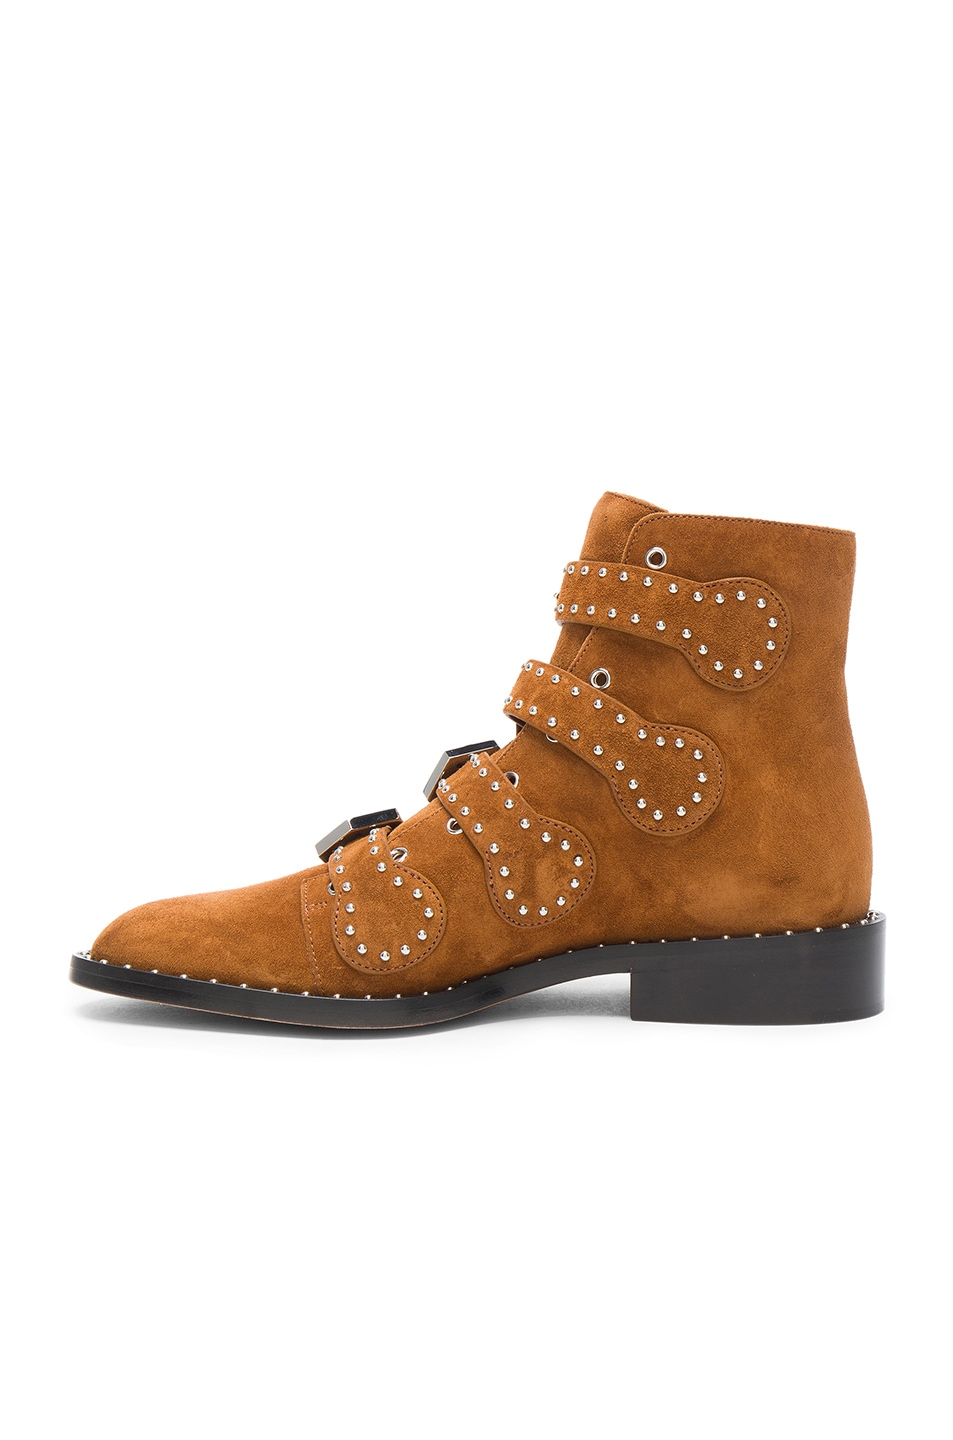 GIVENCHY Elegant Studded Suede Ankle Boots in Caramel Brown | ModeSens